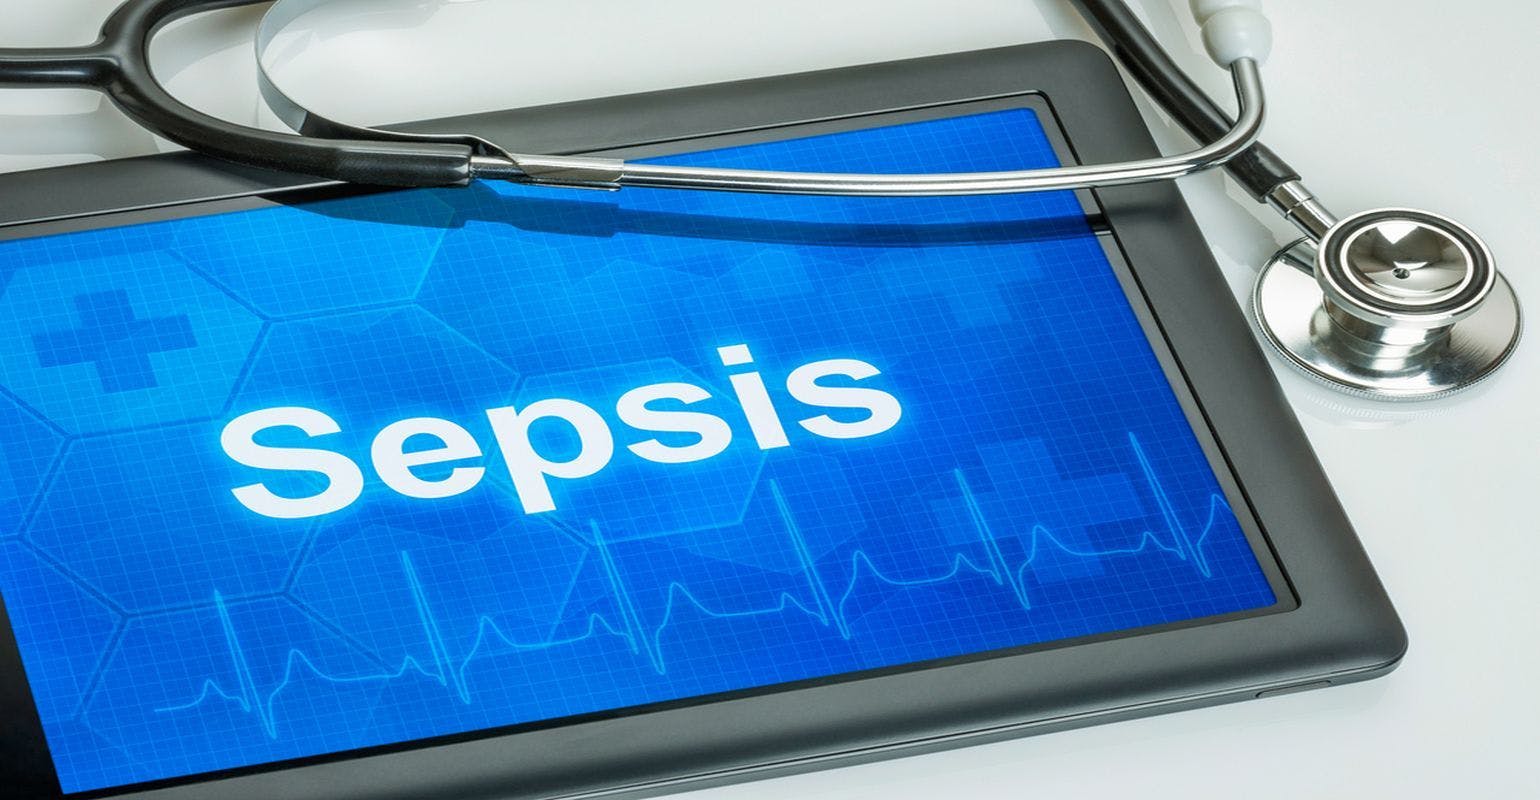  picture of a tablet with "Sepsis" word written on it beside a stethoscope